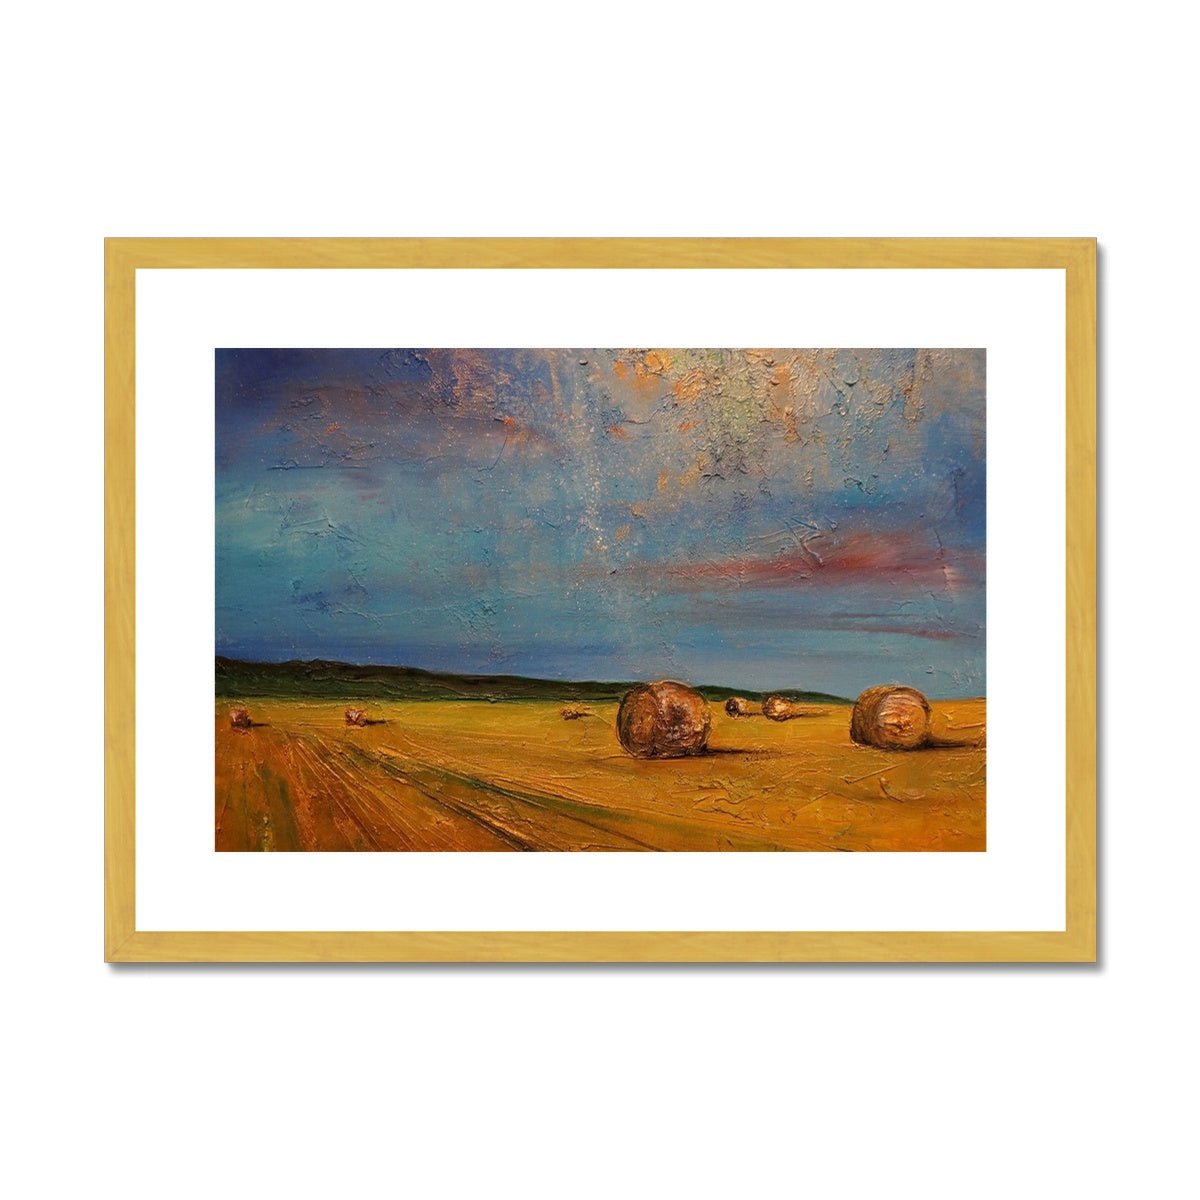 Hay Bales Painting | Antique Framed & Mounted Prints From Scotland-Antique Framed & Mounted Prints-Scottish Highlands & Lowlands Art Gallery-A2 Landscape-Gold Frame-Paintings, Prints, Homeware, Art Gifts From Scotland By Scottish Artist Kevin Hunter